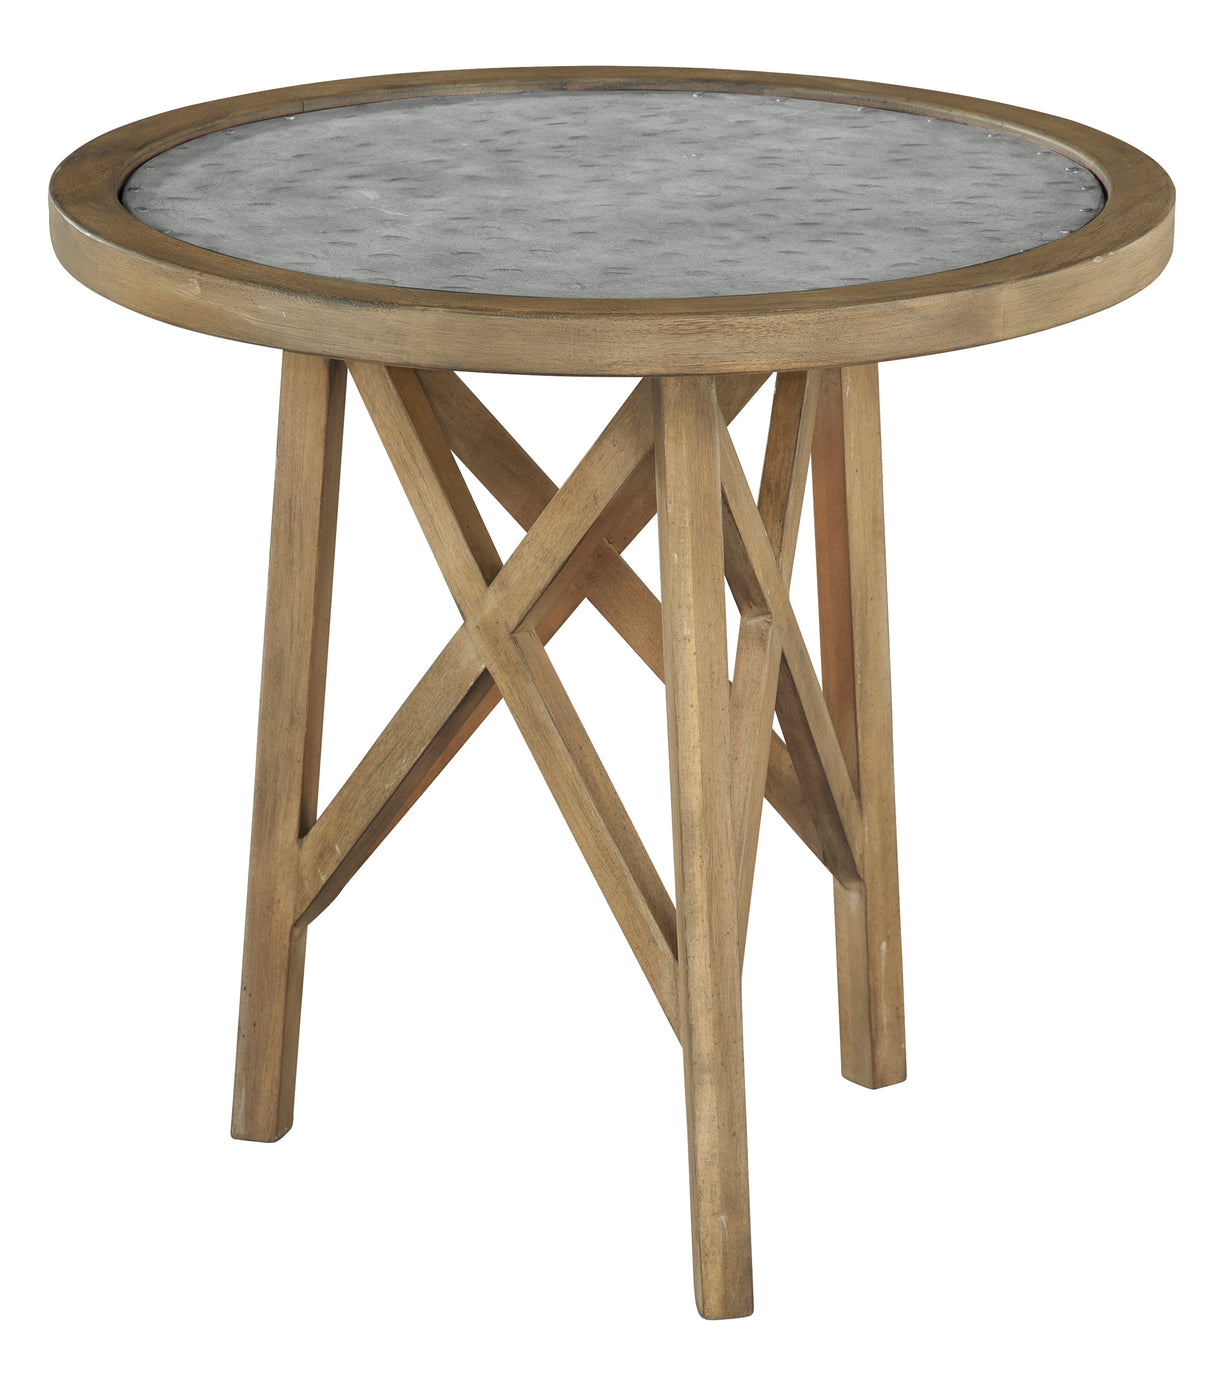 Hekman 27872 Accents 26in. x 26in. x 26in. End Table